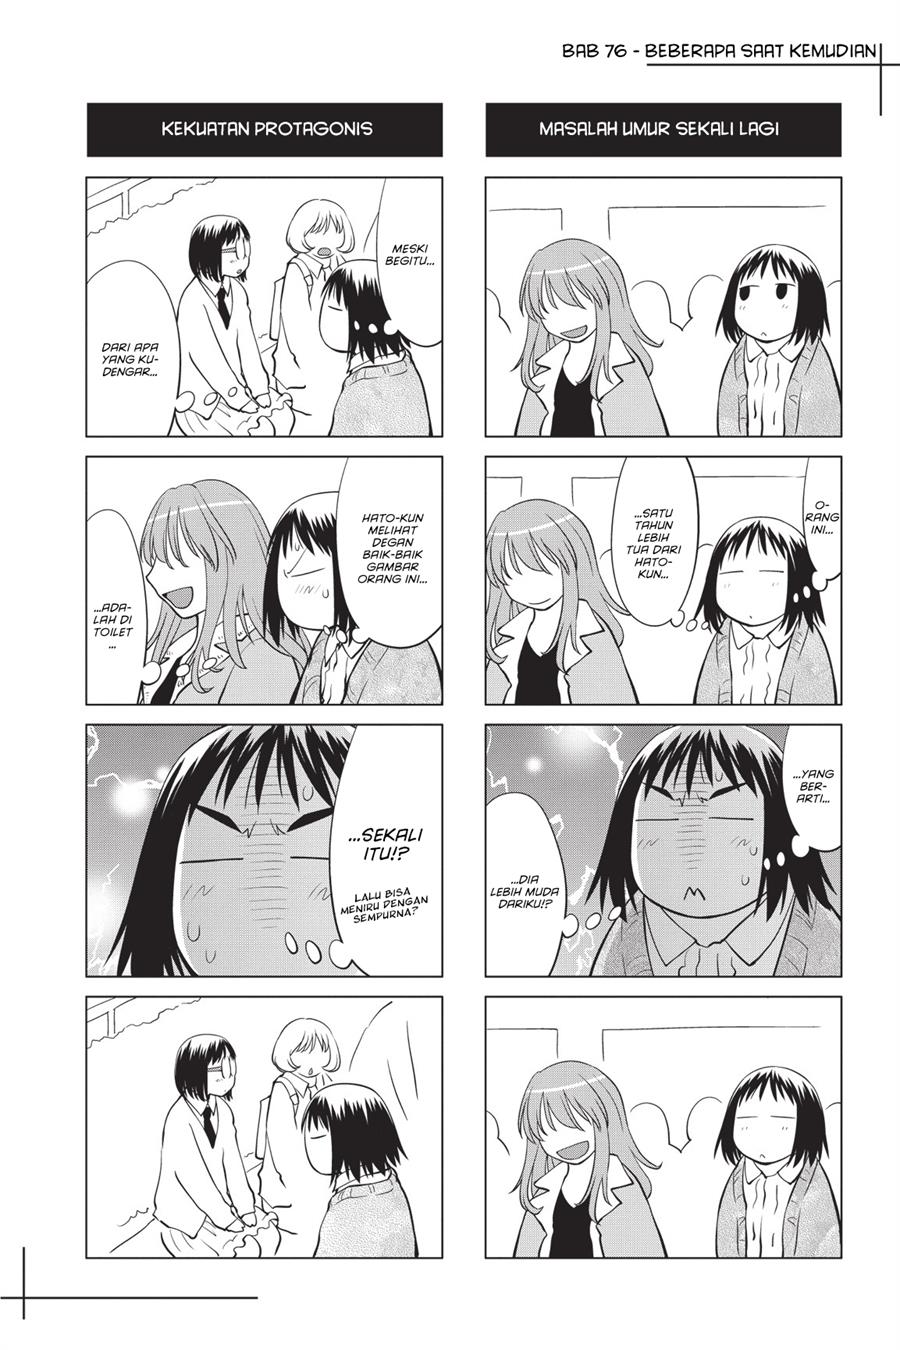 Genshiken – The Society for the Study of Modern Visual Culture Chapter 76 Image 28